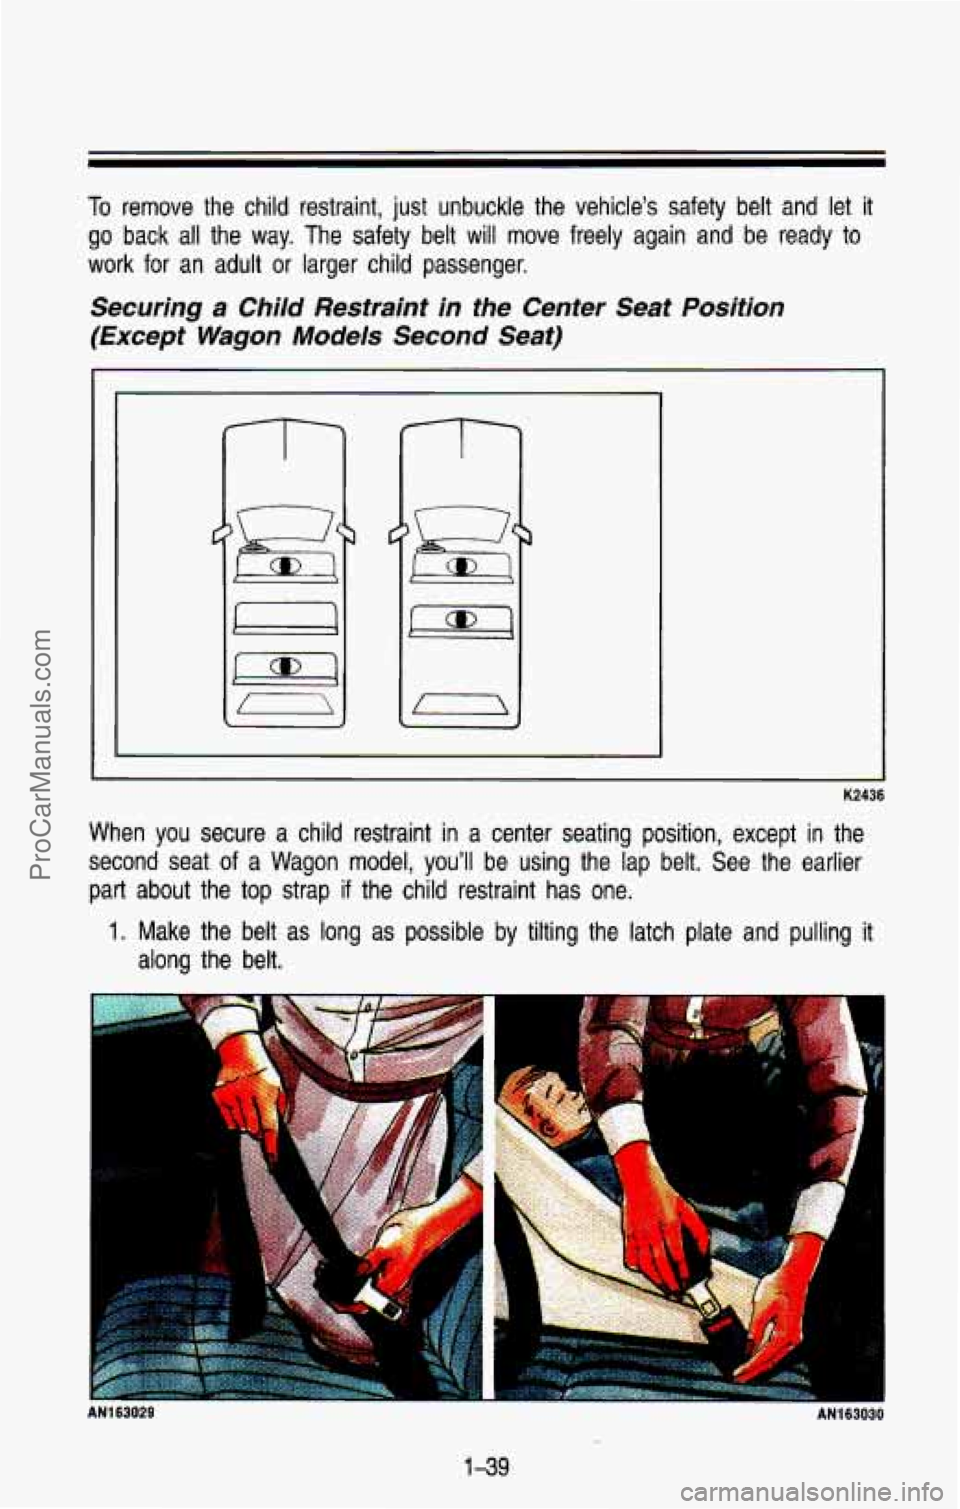 CHEVROLET SUBURBAN 1993  Owners Manual To remove  the child restraint,  just  unbuckle  the  vehicle’s  safety  belt  and  let it 
go back all the way. The safety  belt will move  freely  again  and  be  ready  to 
work  for  an  adult 
